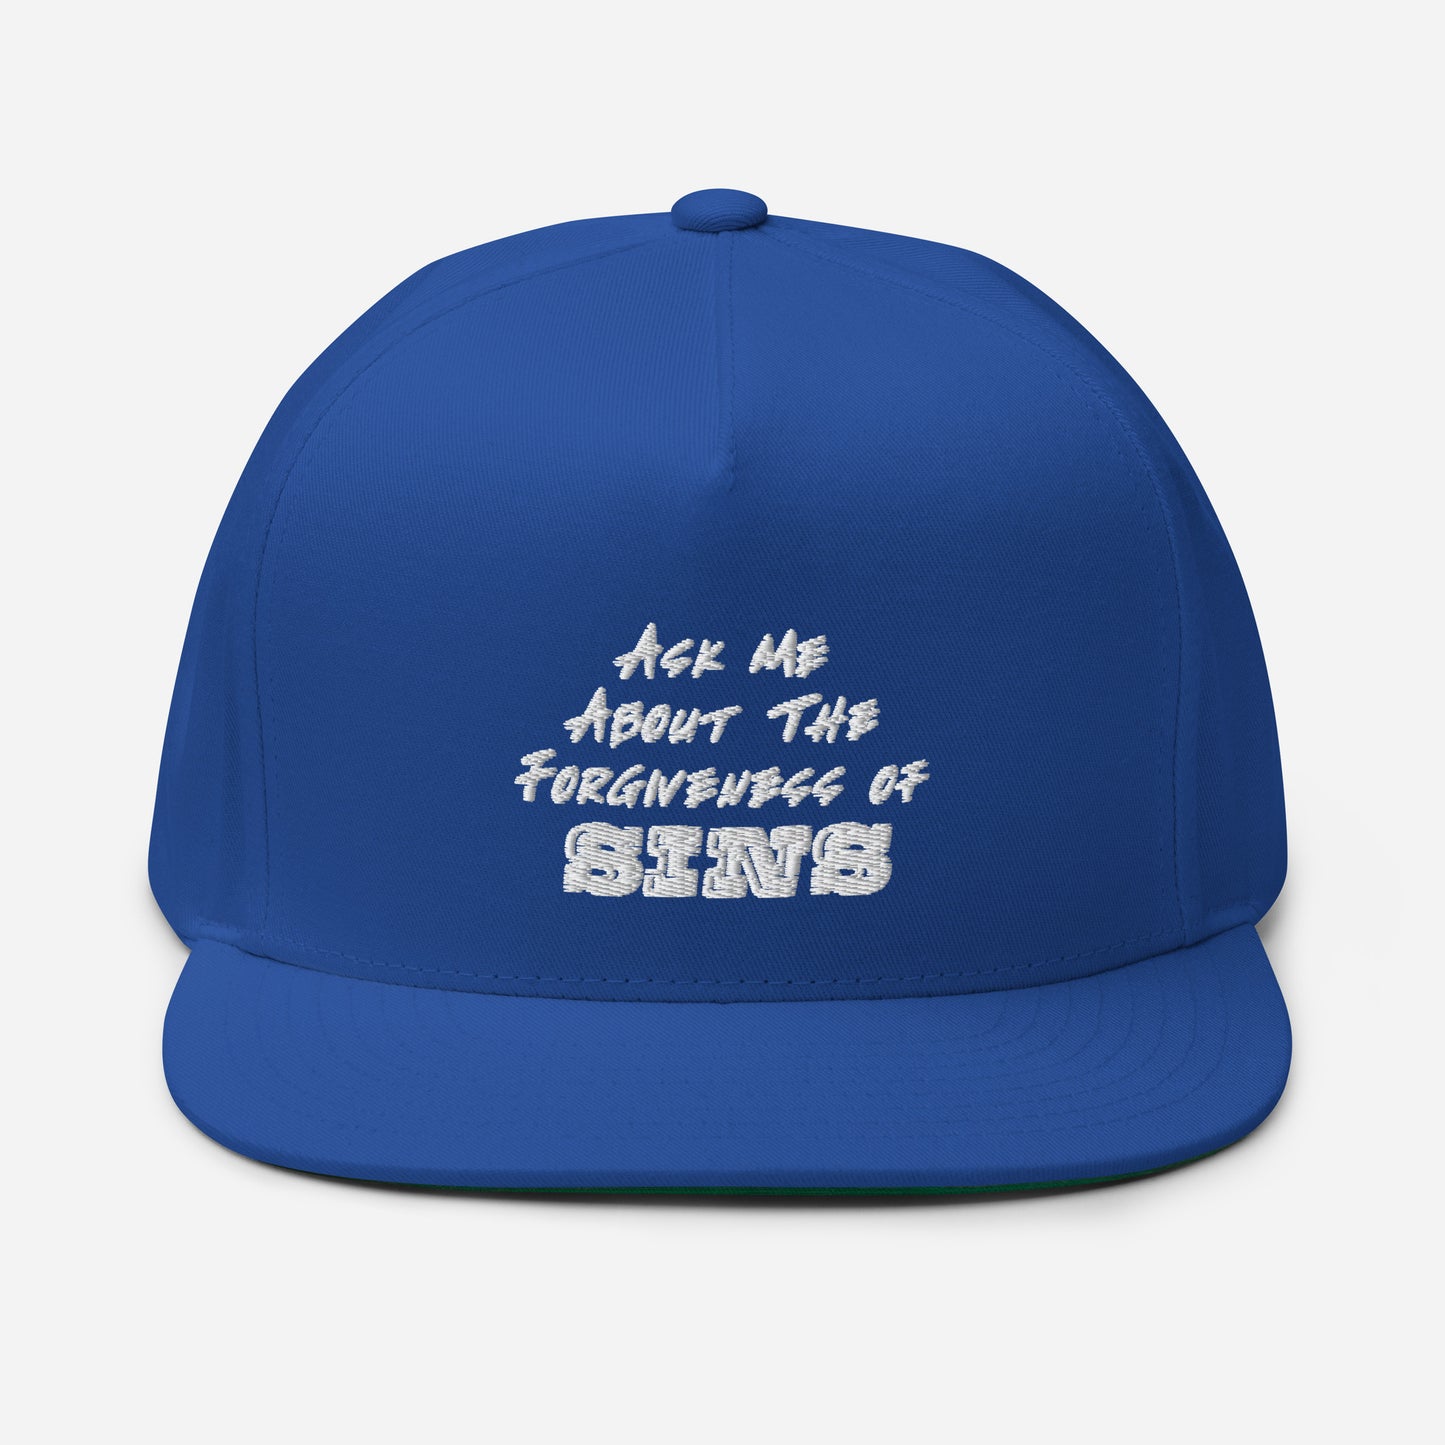 Ask Me About The Forgiveness of Sins Flat Bill Cap